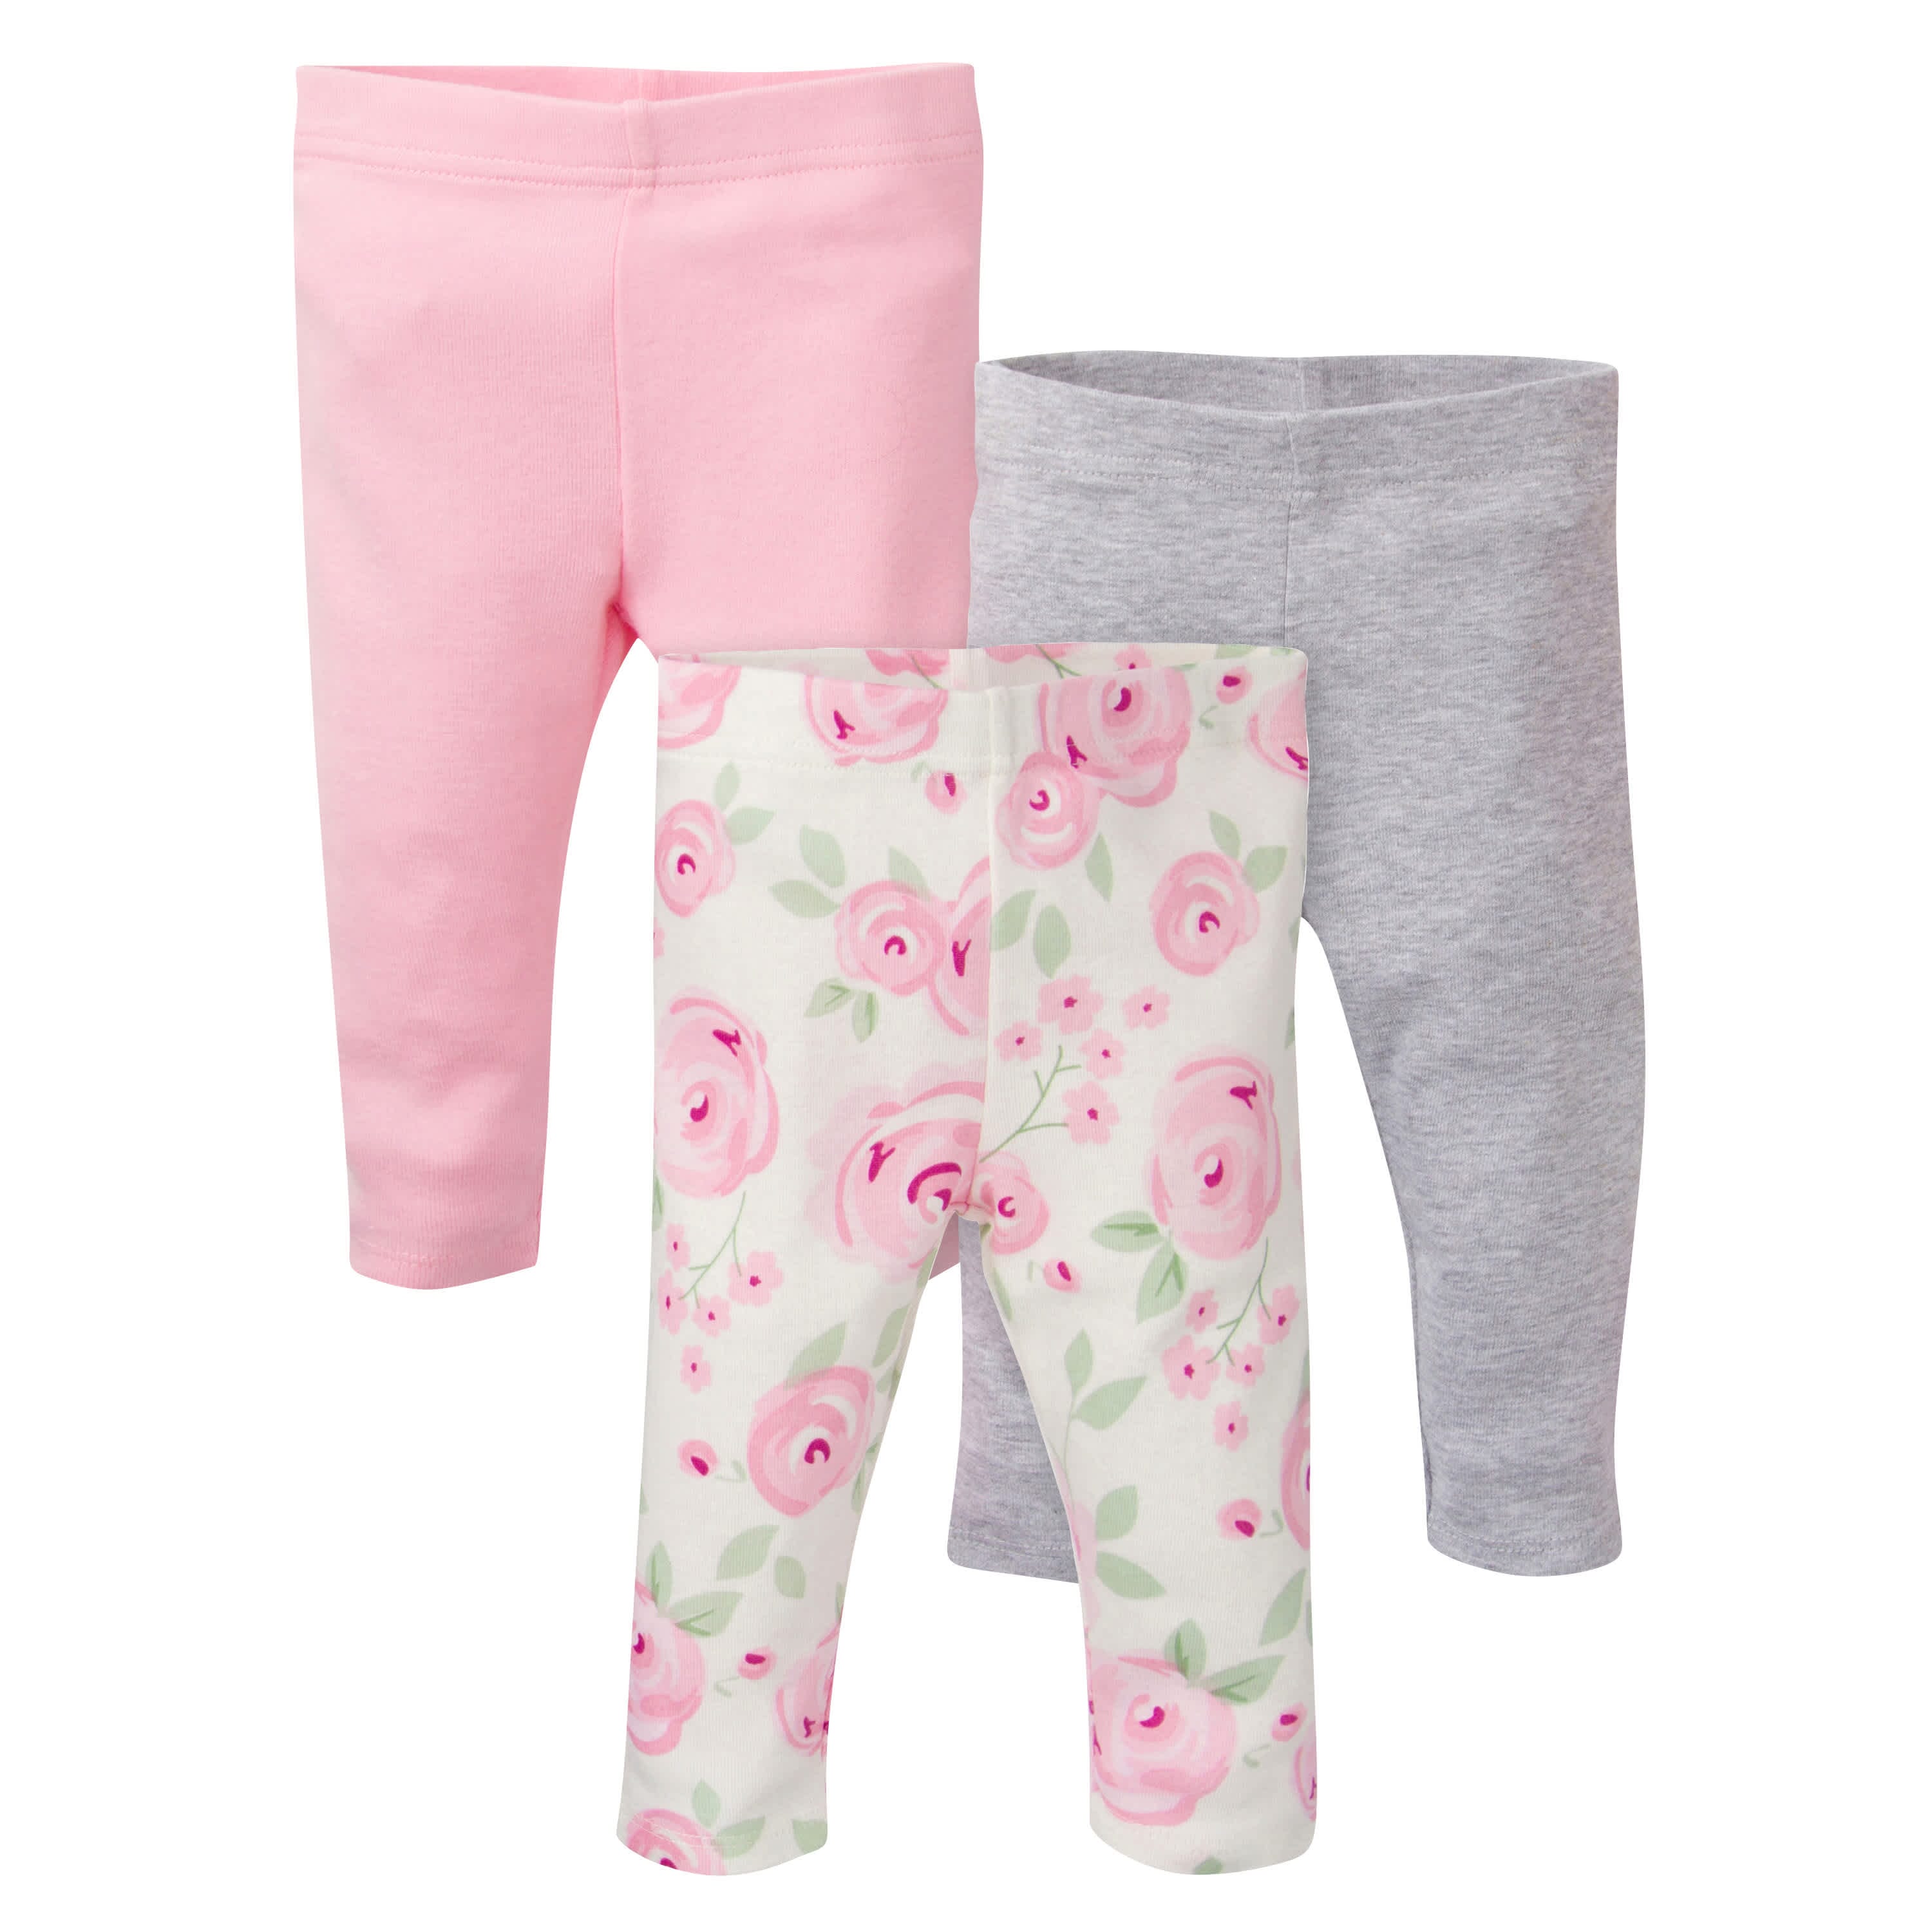 Buy 4Pcs Infant Girl Outfits Baby Sister Bodysuit Tops Floral Leggings Pants  Set Bowknot Headbands Newborn Pajamas Clothes at Amazon.in